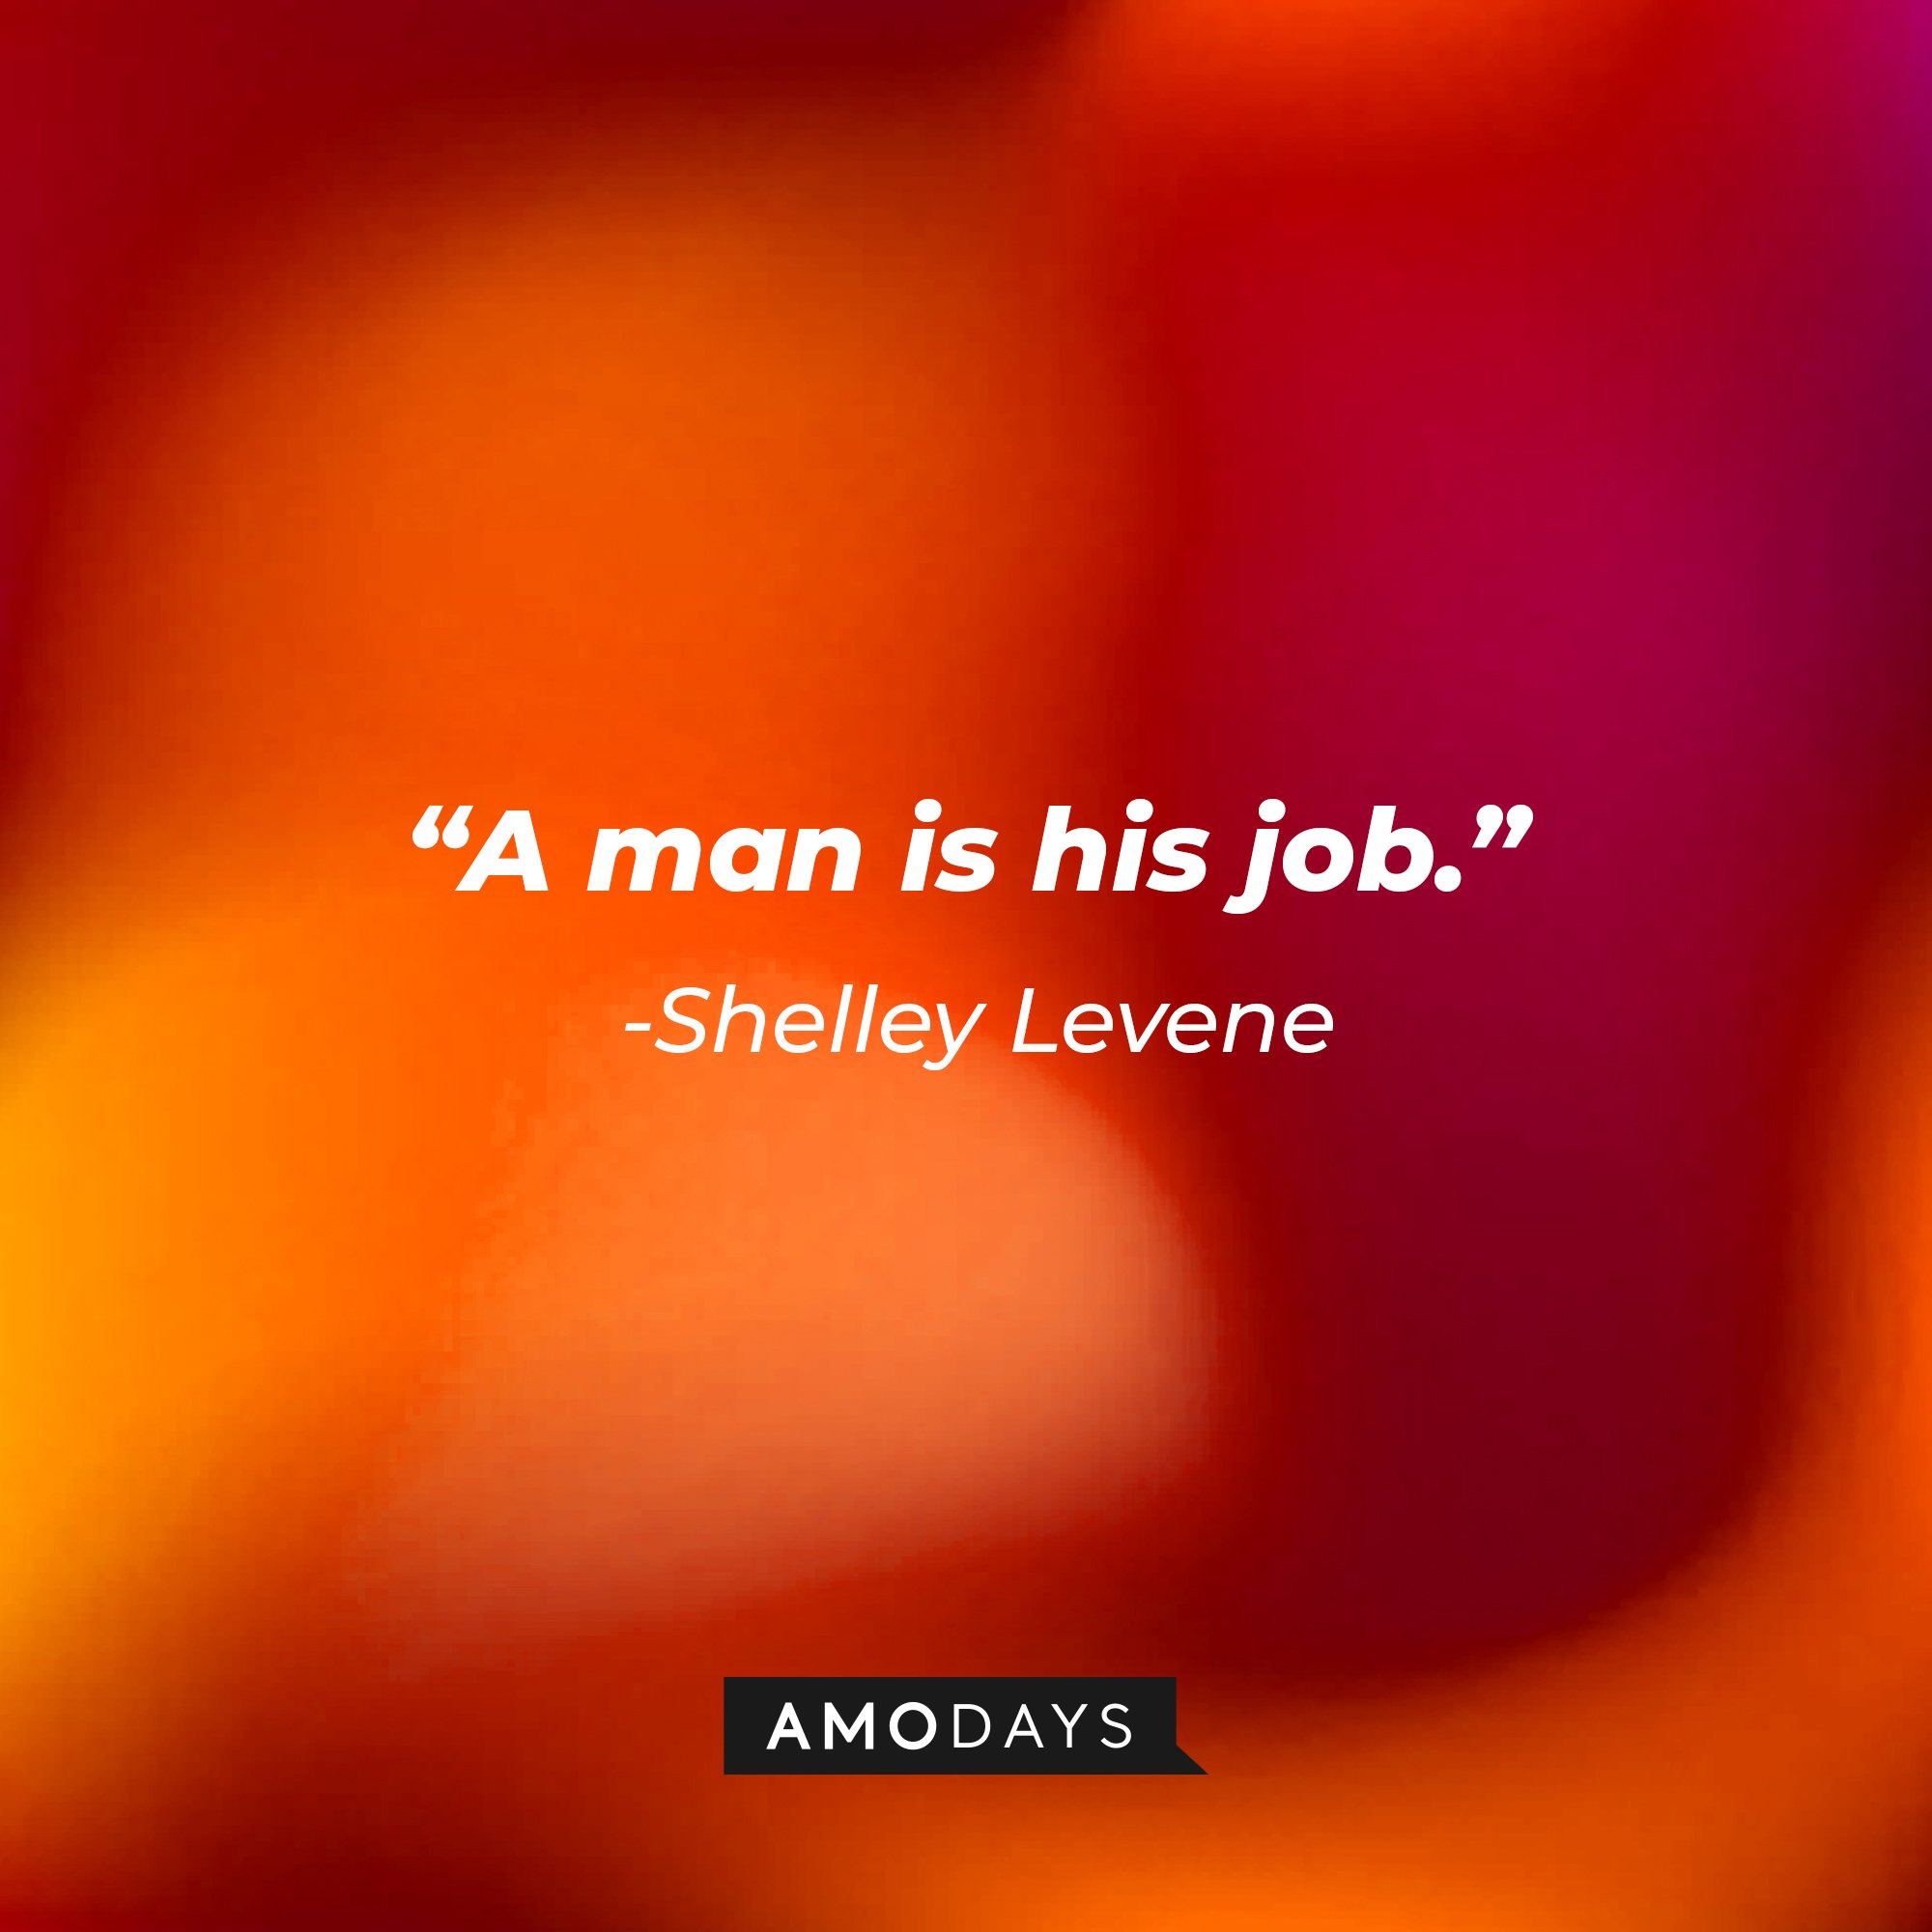 Shelley Levene's quote: "A man is his job."  | Image: AmoDays